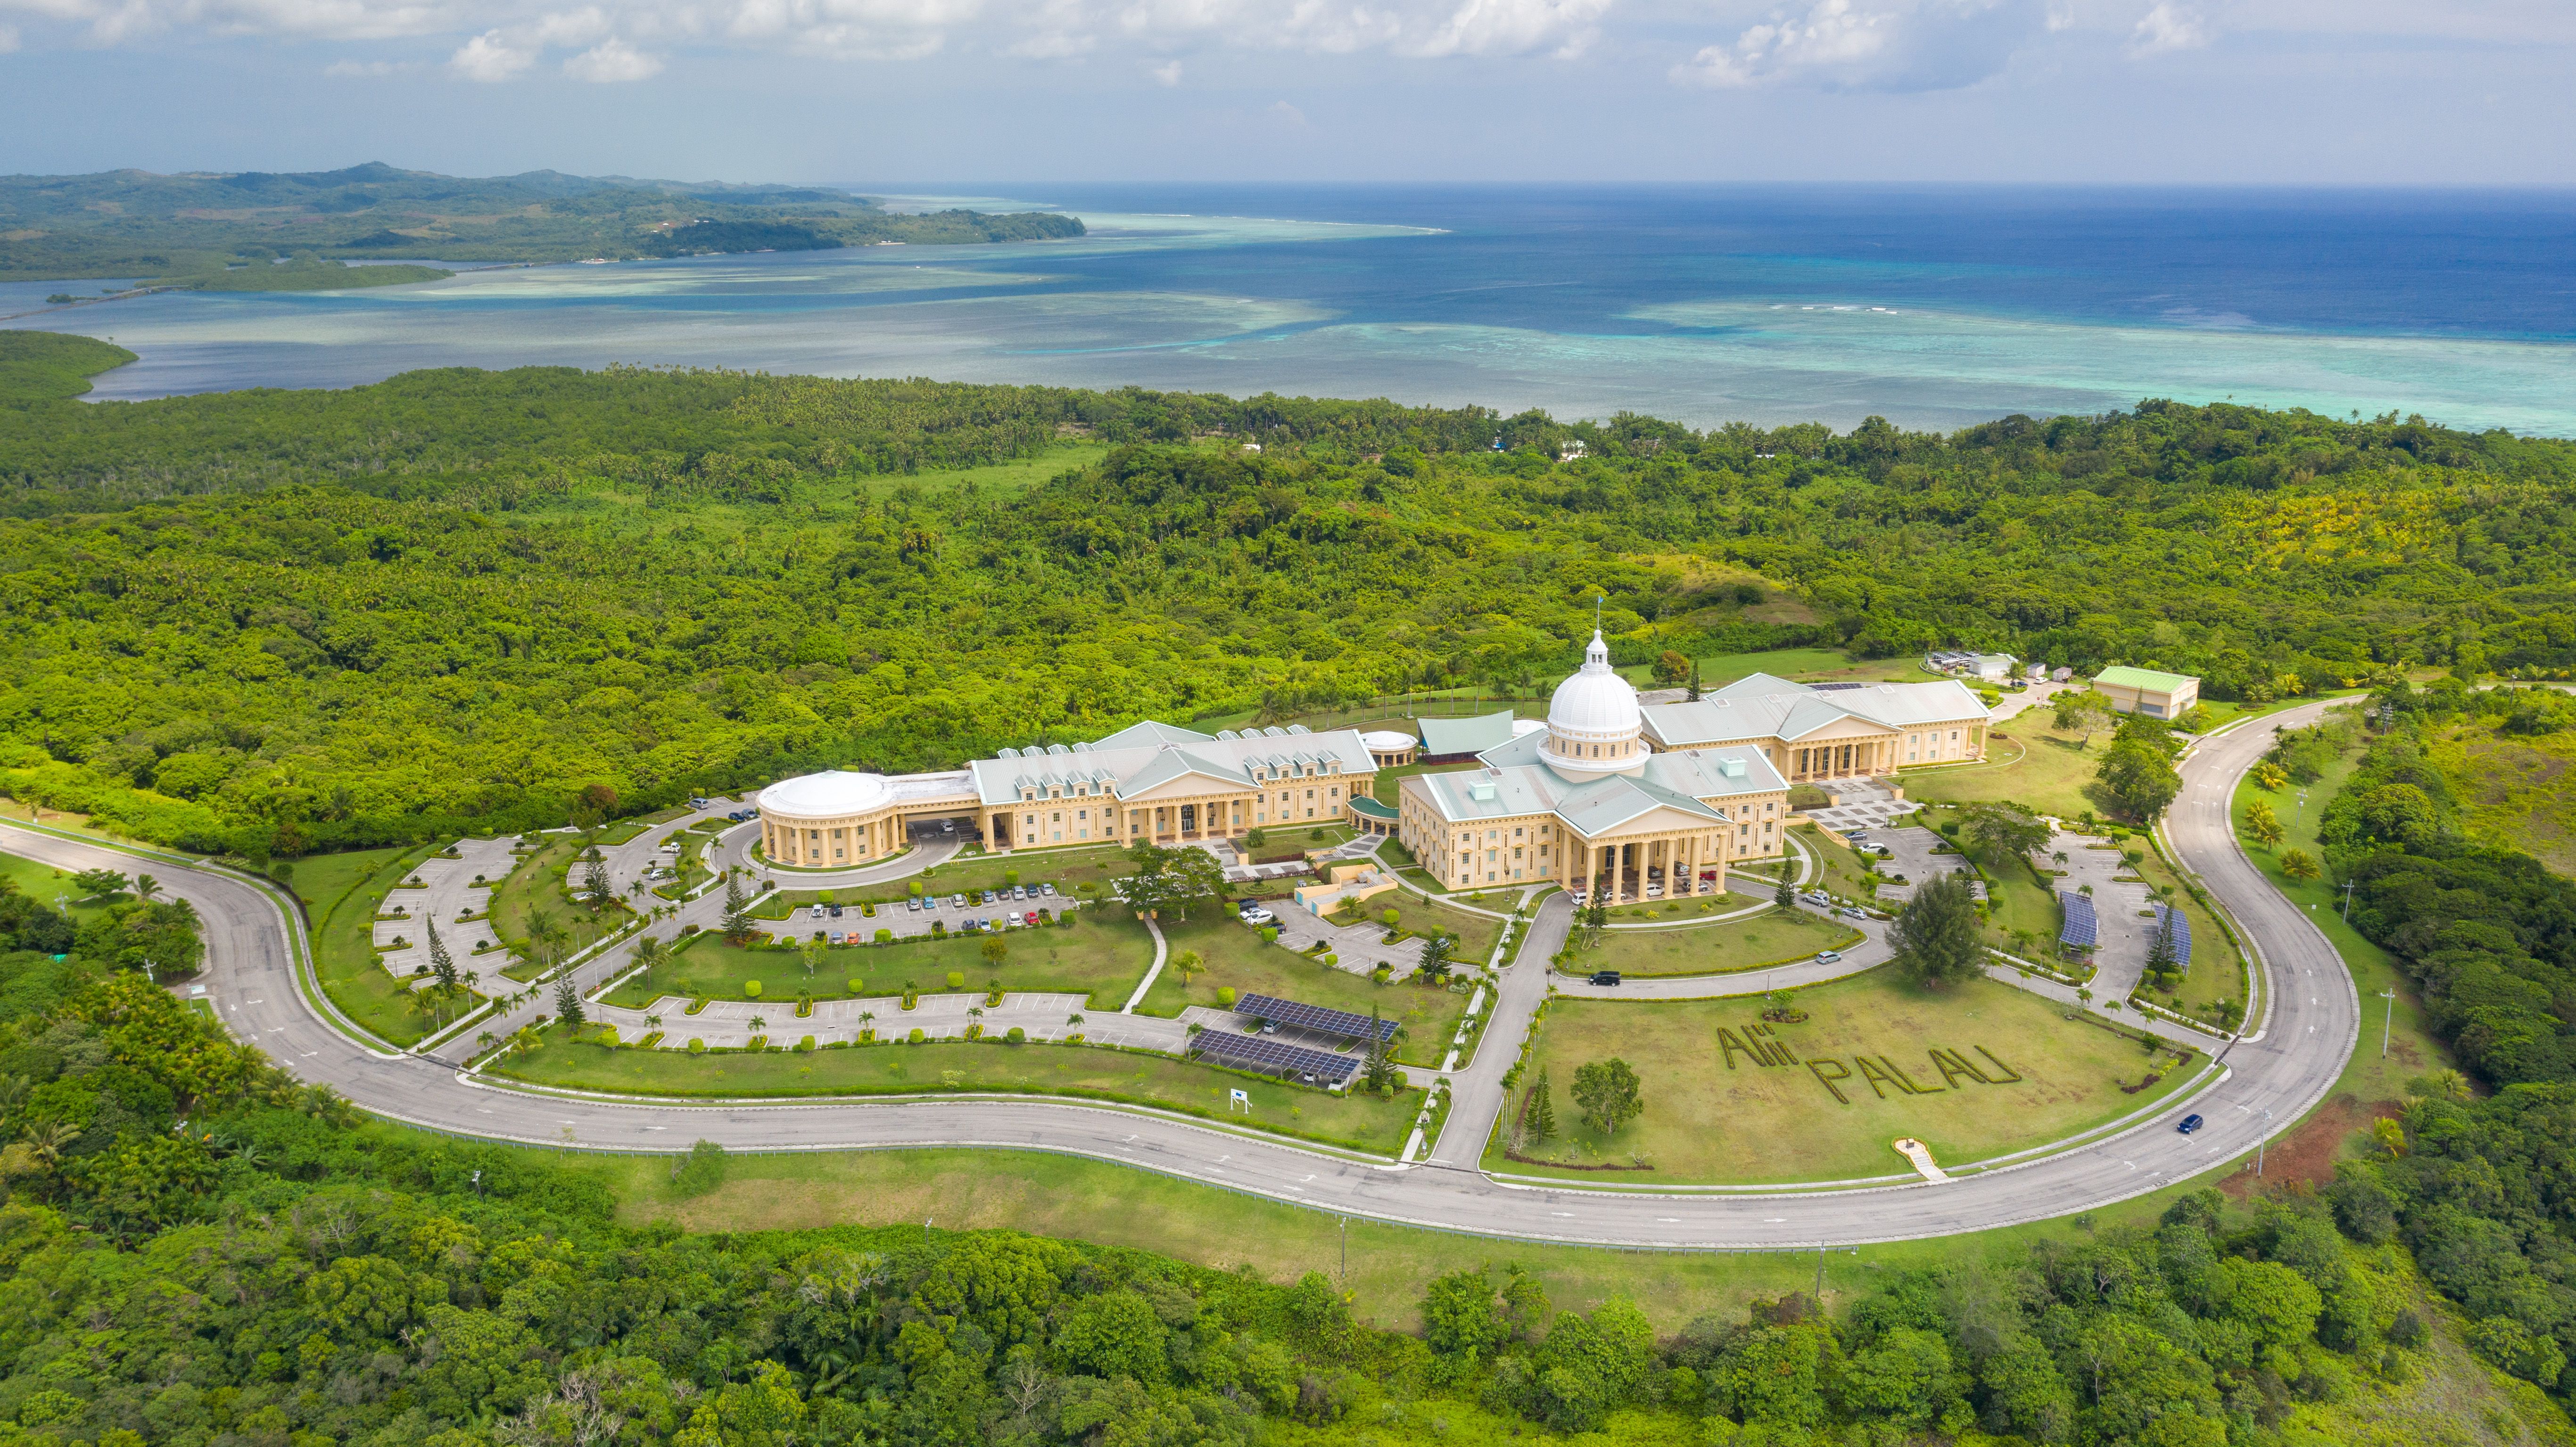 Capitol building in Ngerulmud, Palau, one of the world's youngest countries 